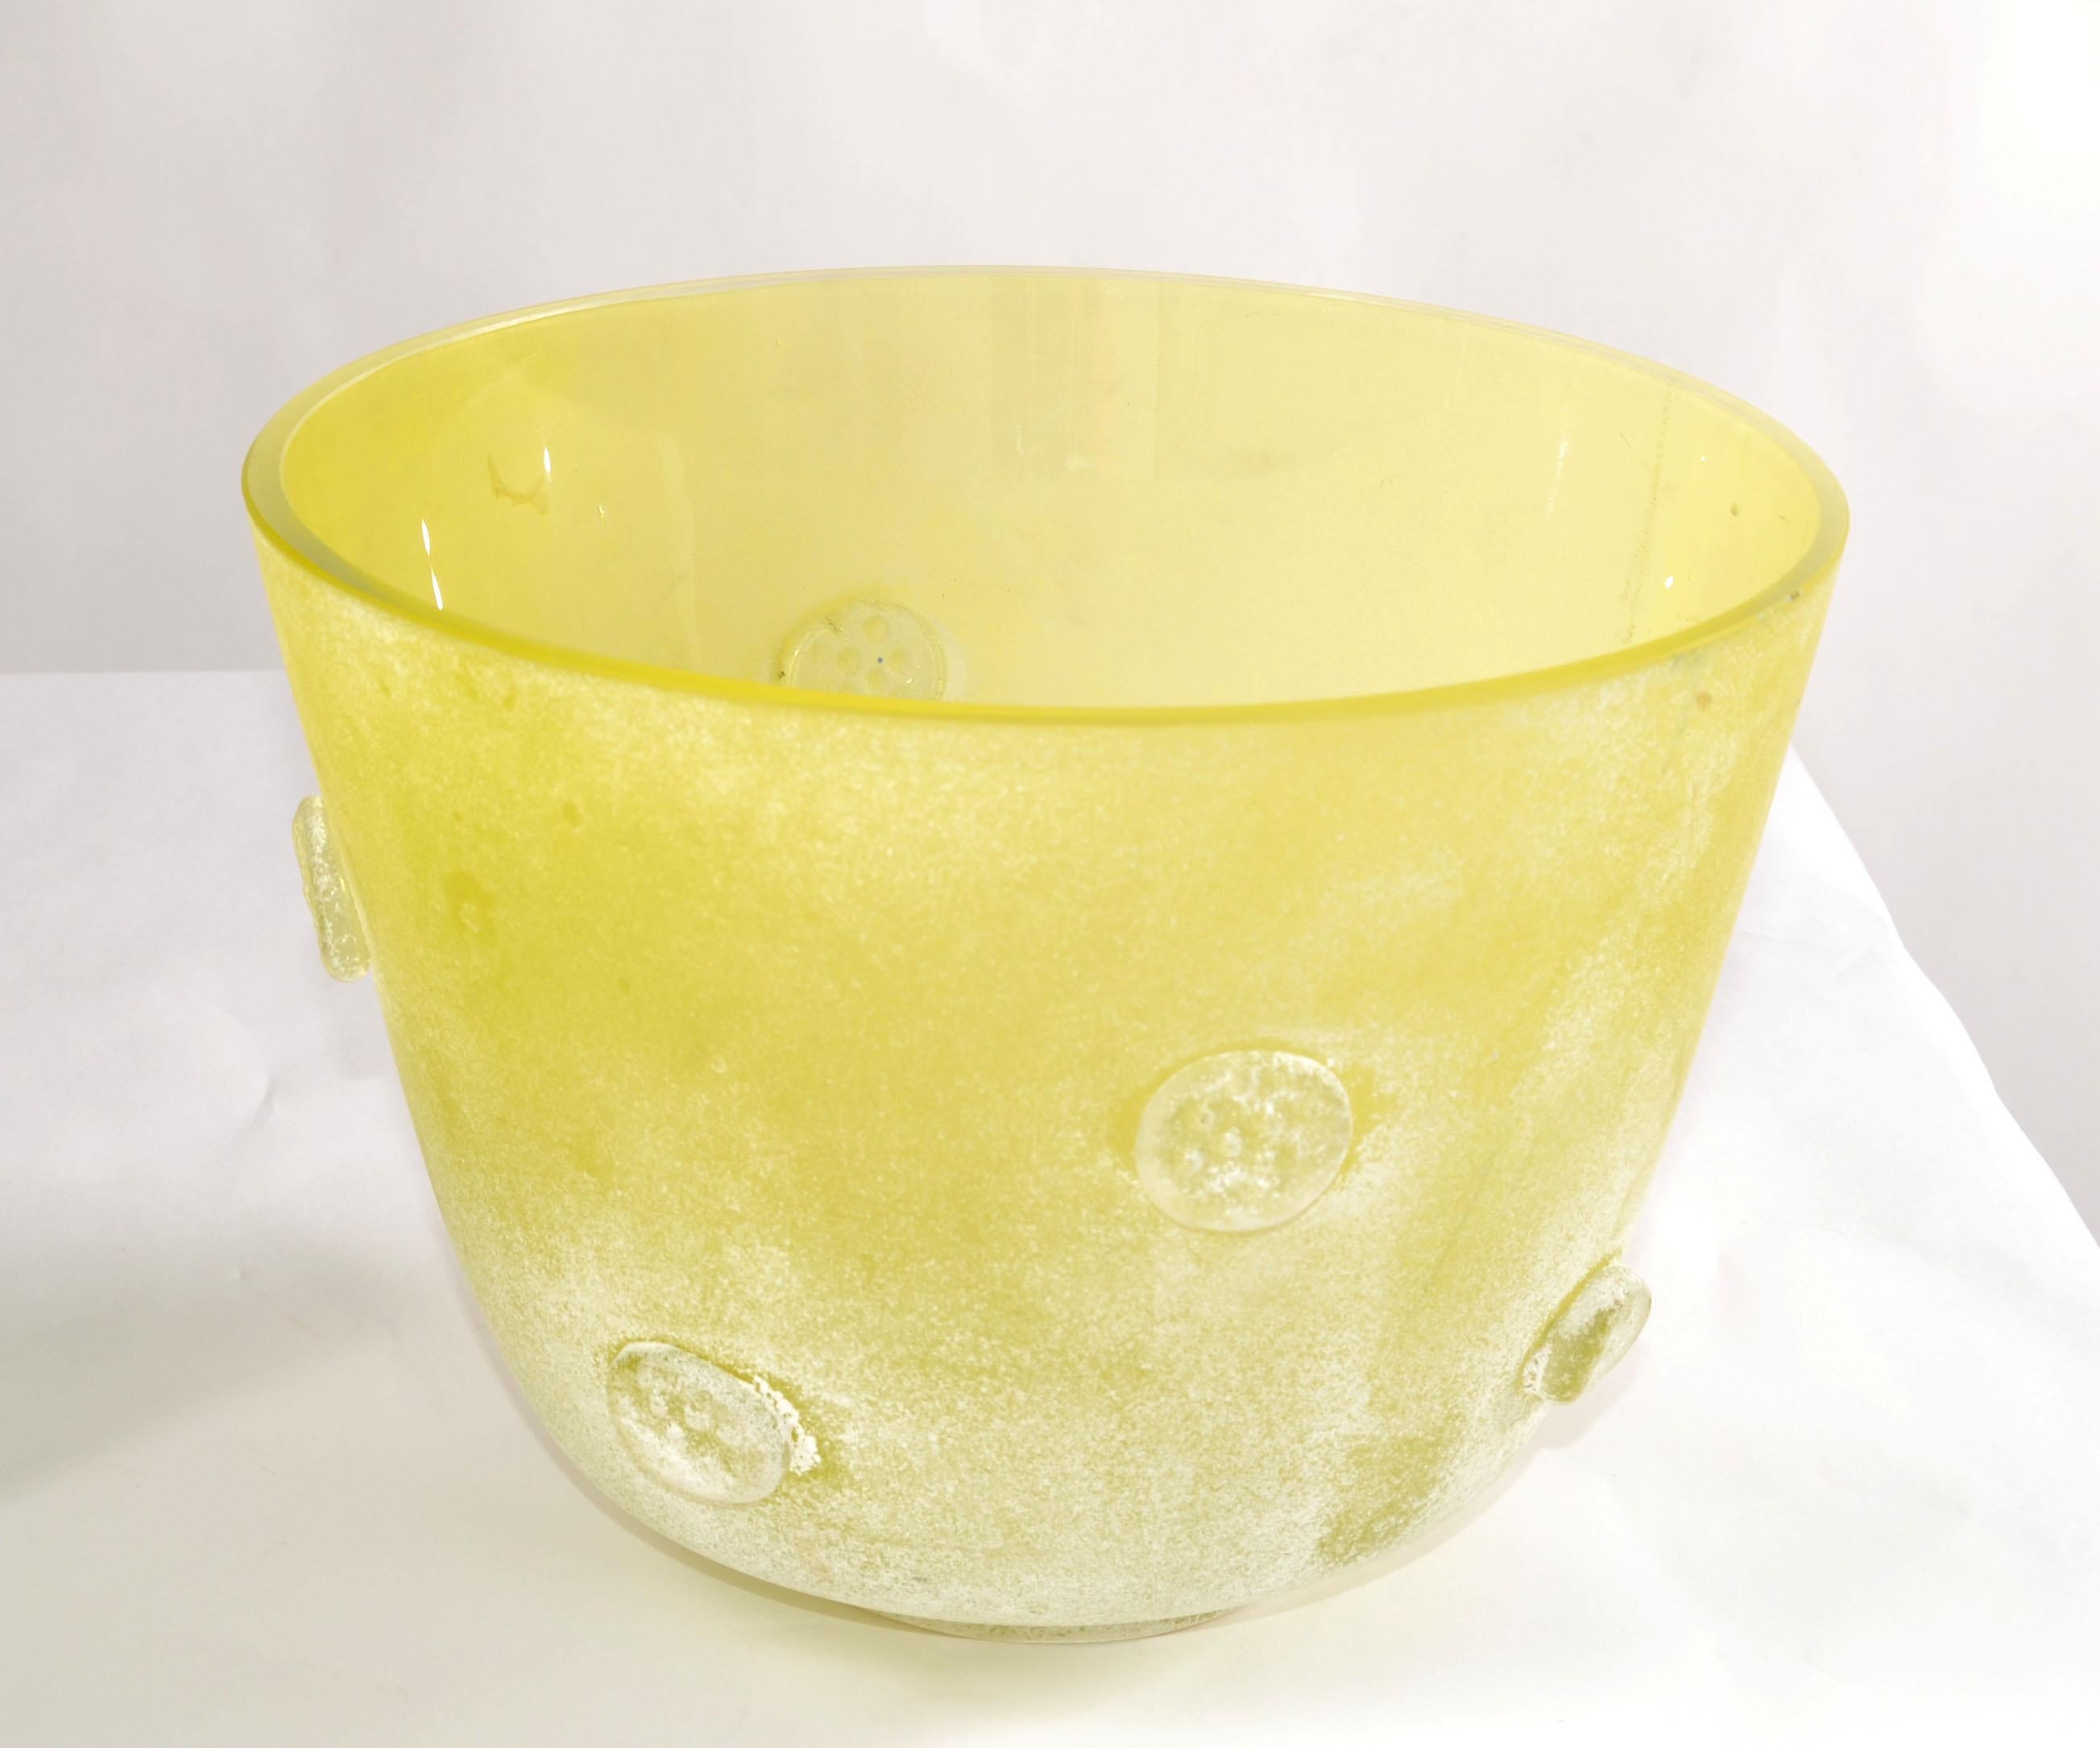 Archimede Seguso Italy Scavo Blown Murano Glass frosted white & Yellow Art Glass bowl, vessel, Centerpiece Mid-Century Modern made by Seguso Vetri d'Arte Italy circa in late 1970s.
Pas de marques.
En très bon état vintage, usure normale due à